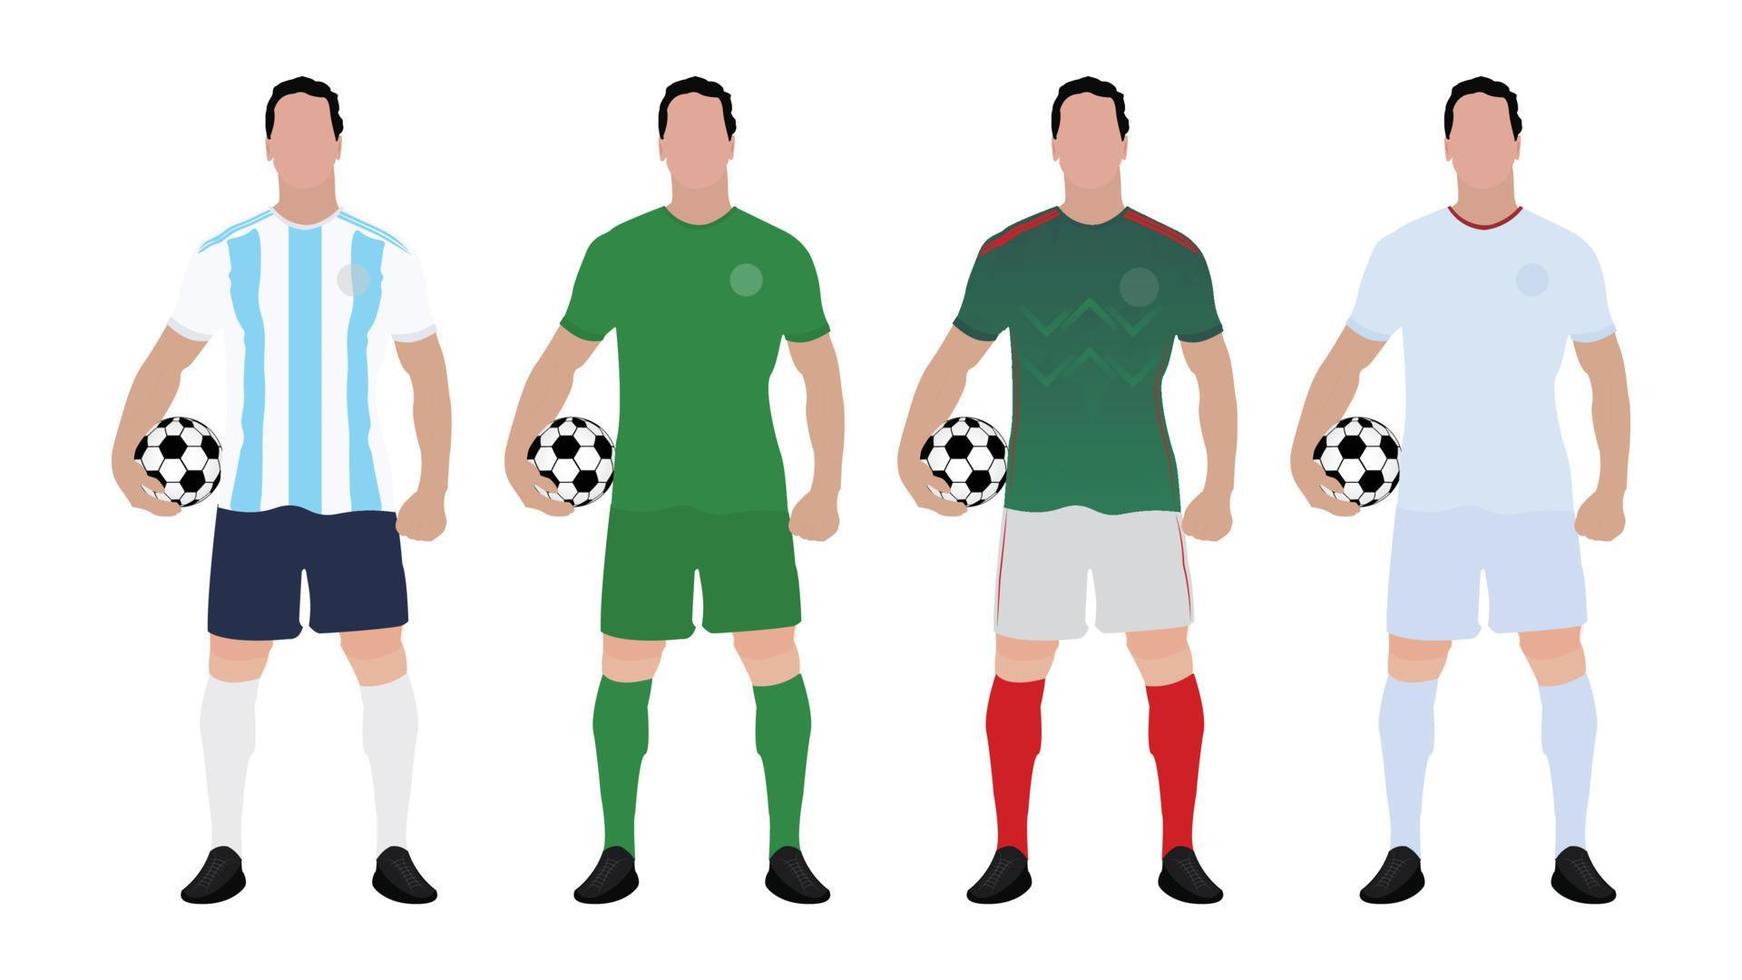 World football championship group c team with their team kit vector